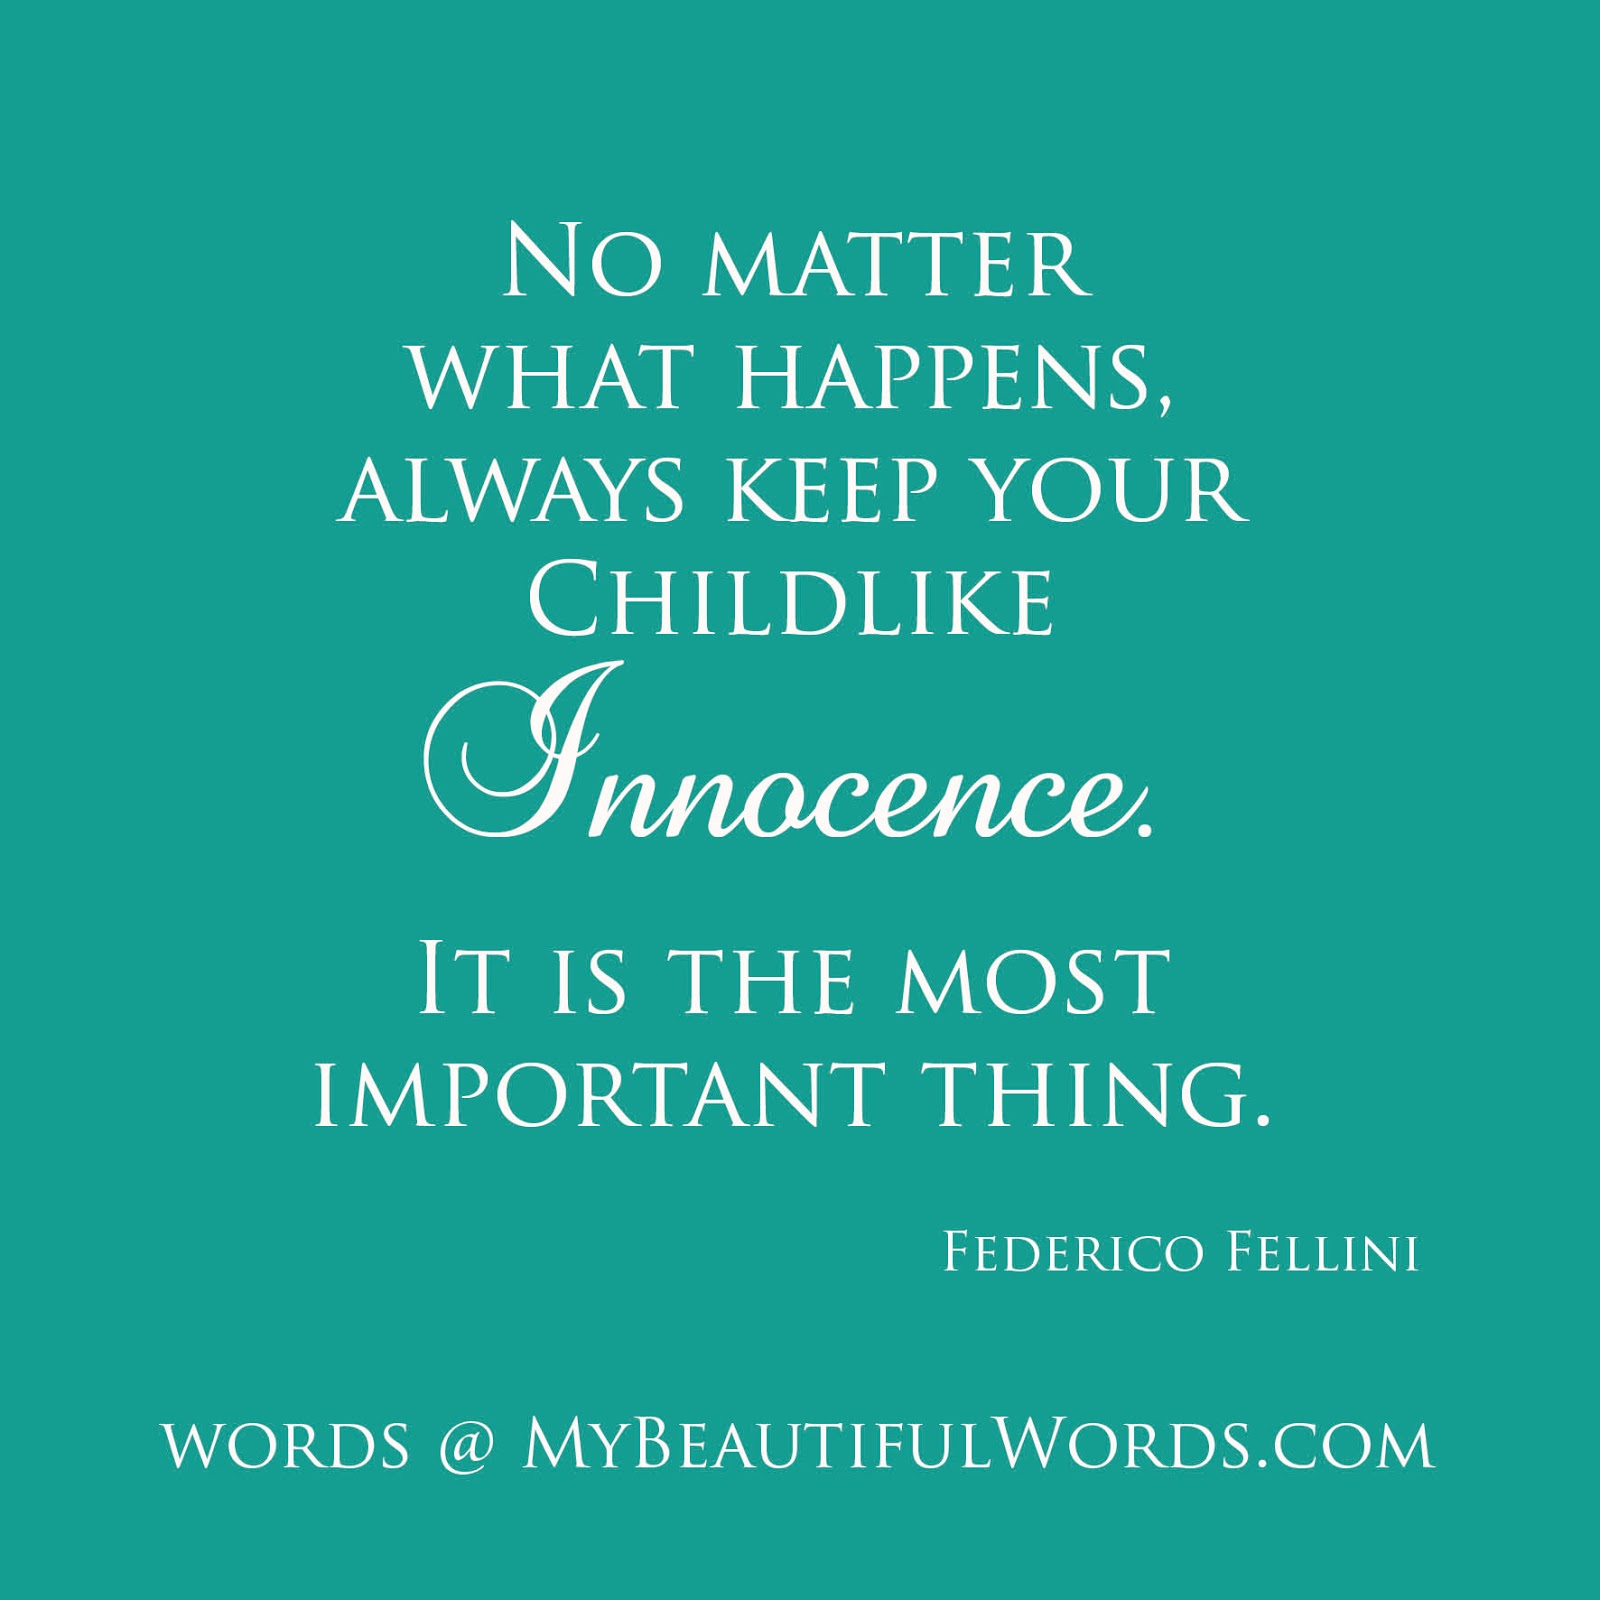 No matter what happens, always Keep your childhood innocence. It’s the most important thing. Federico Fellini